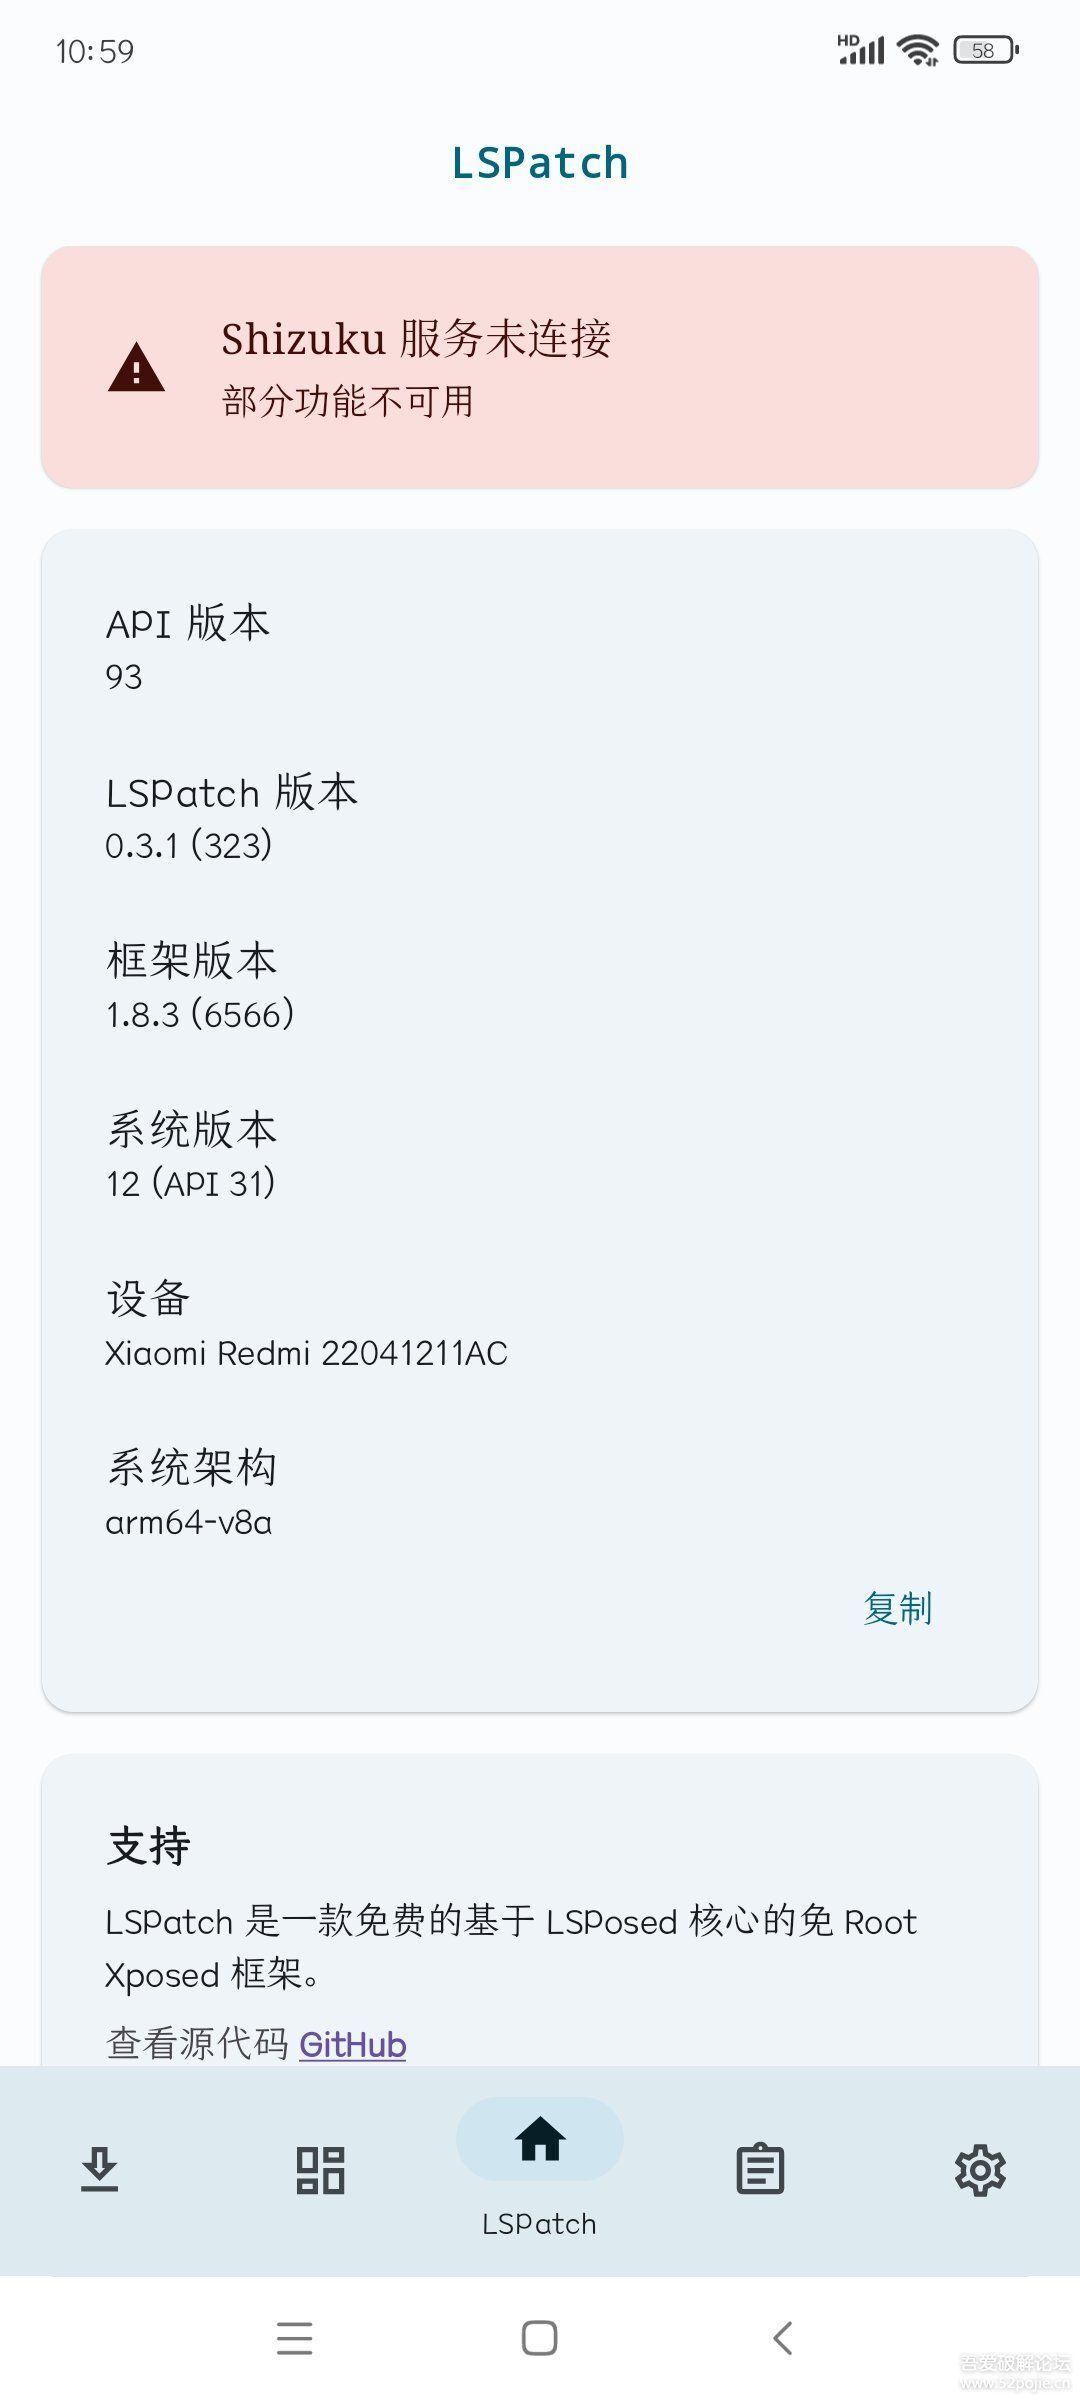 LSPatch 0.3.1(325)_免root凯入Xposed模块